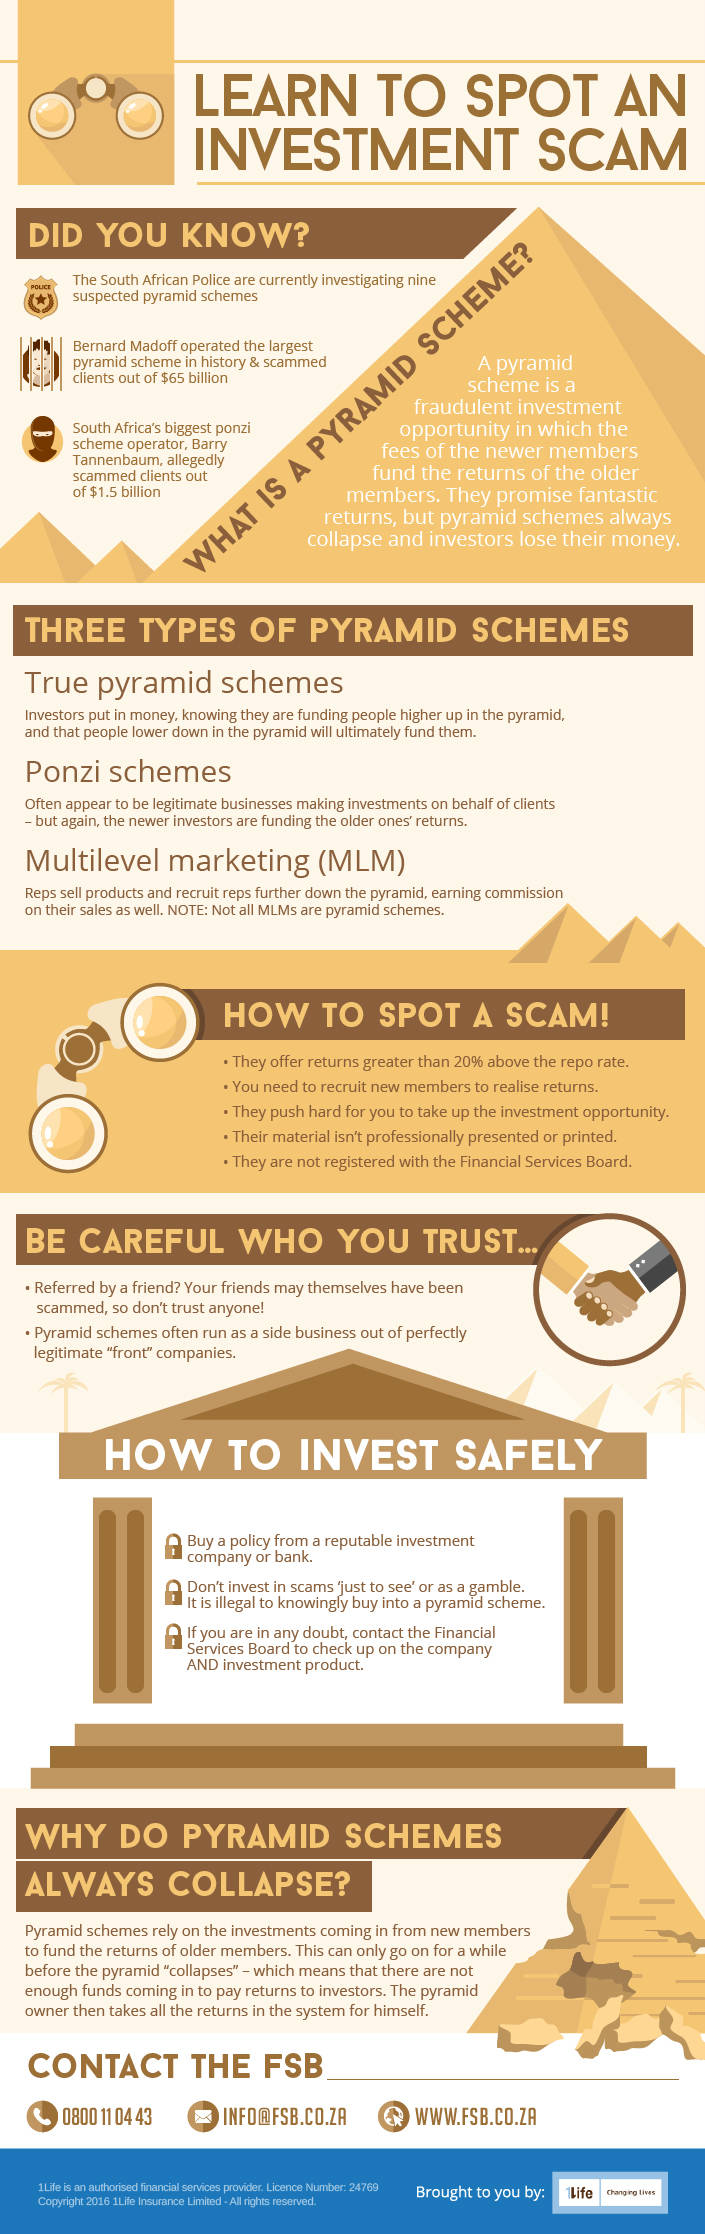 Learn to spot an investment scam